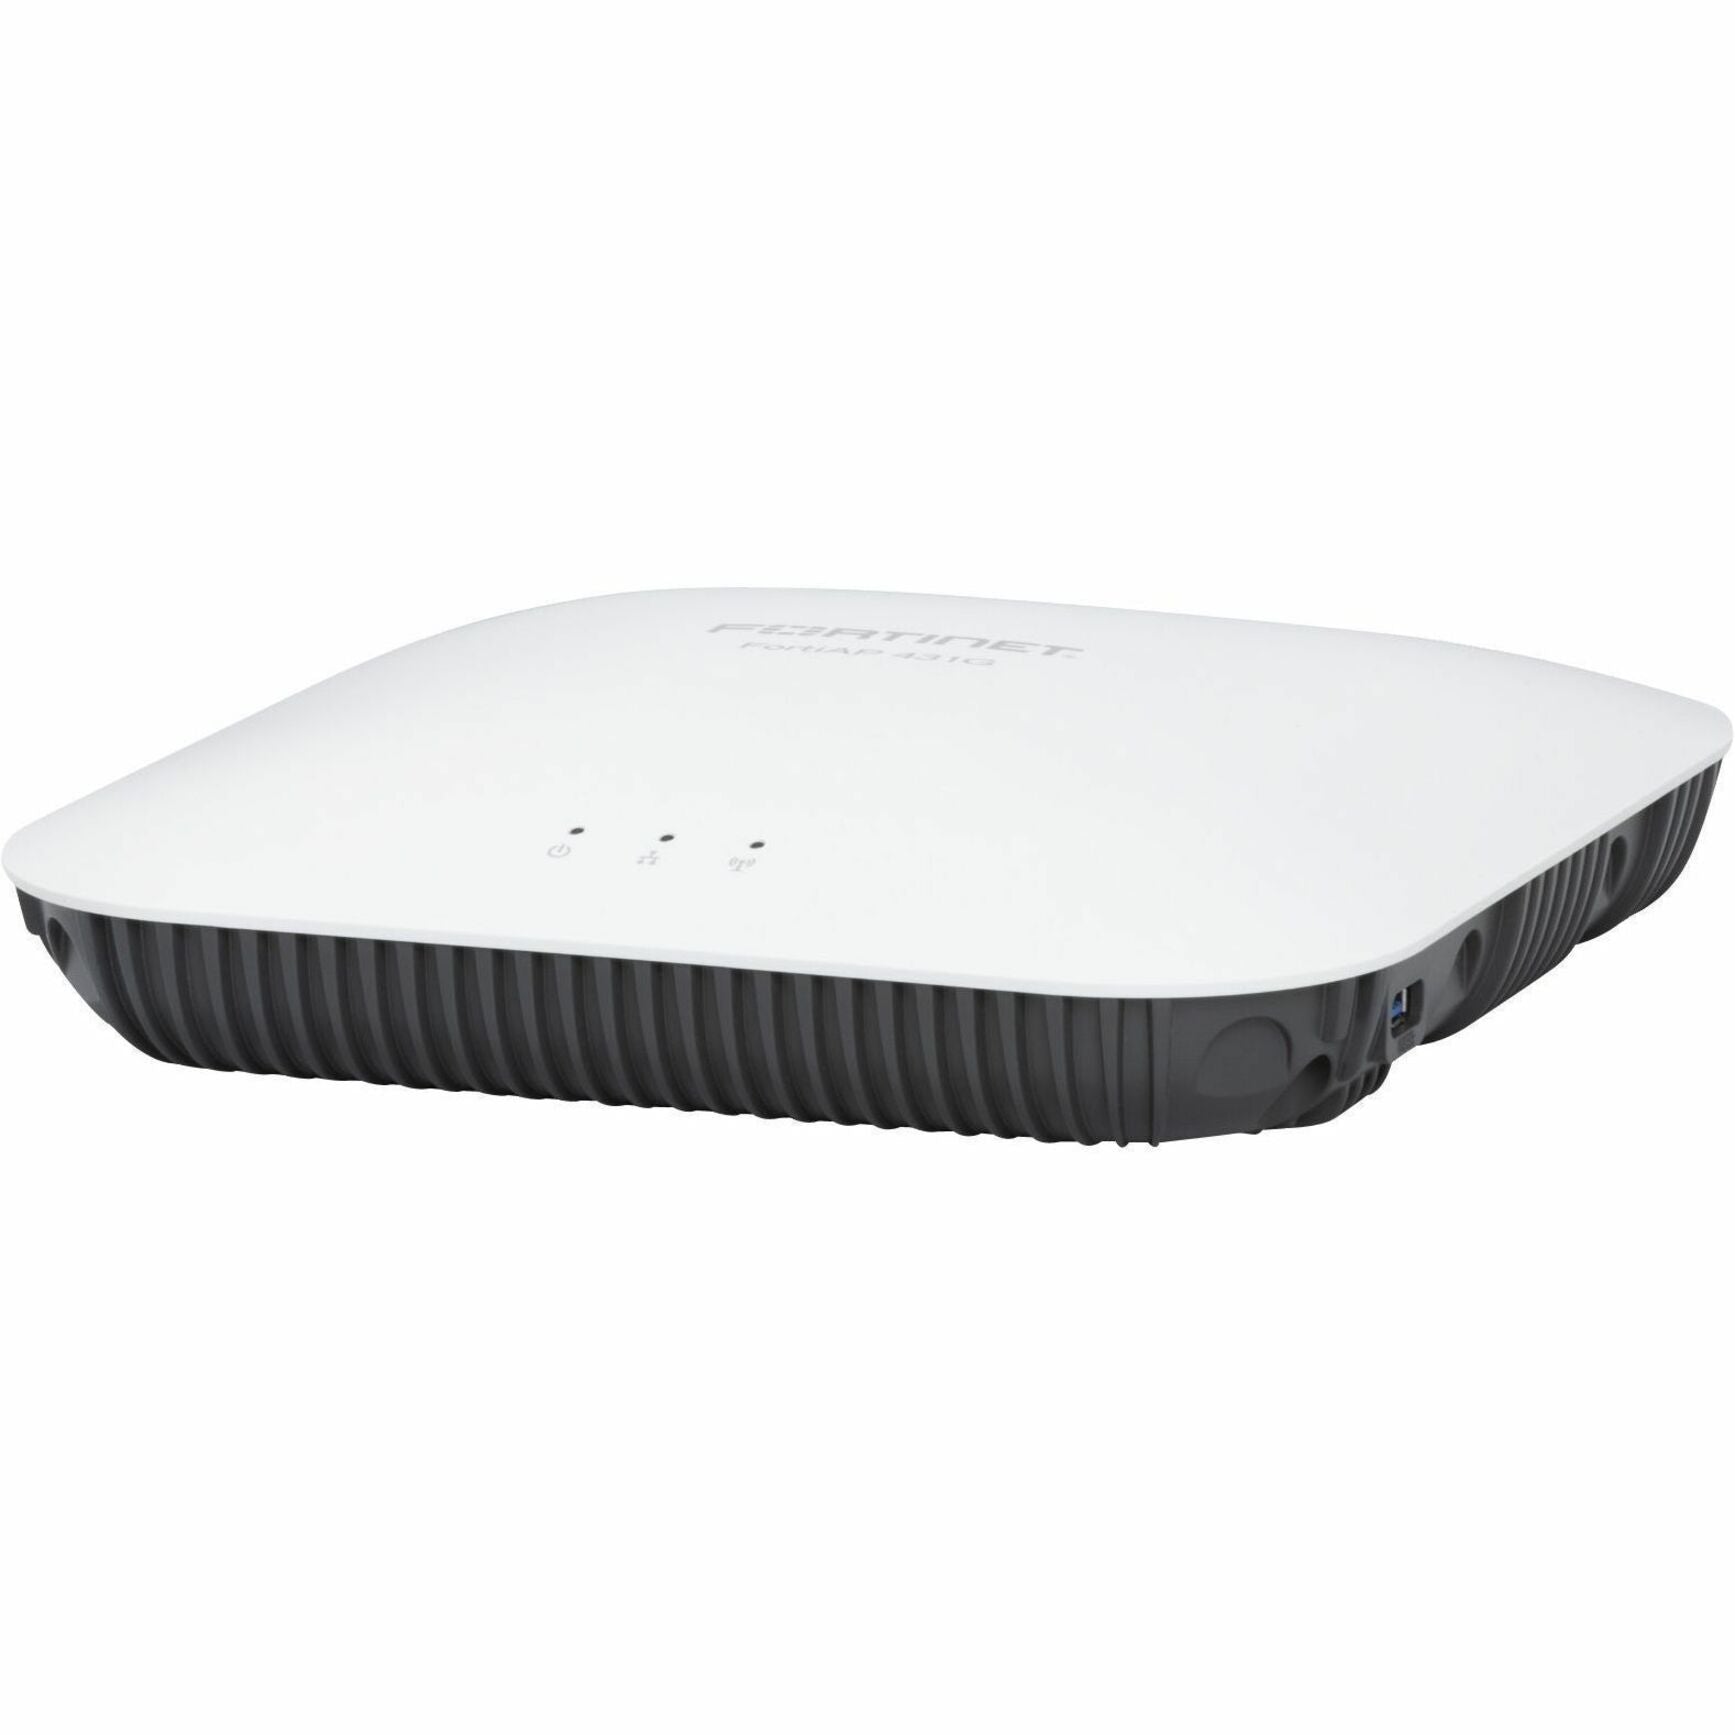 Fortinet FAP-431G-A FortiAP 431G Wireless Access Point, Tri Band, 8.16 Gbit/s